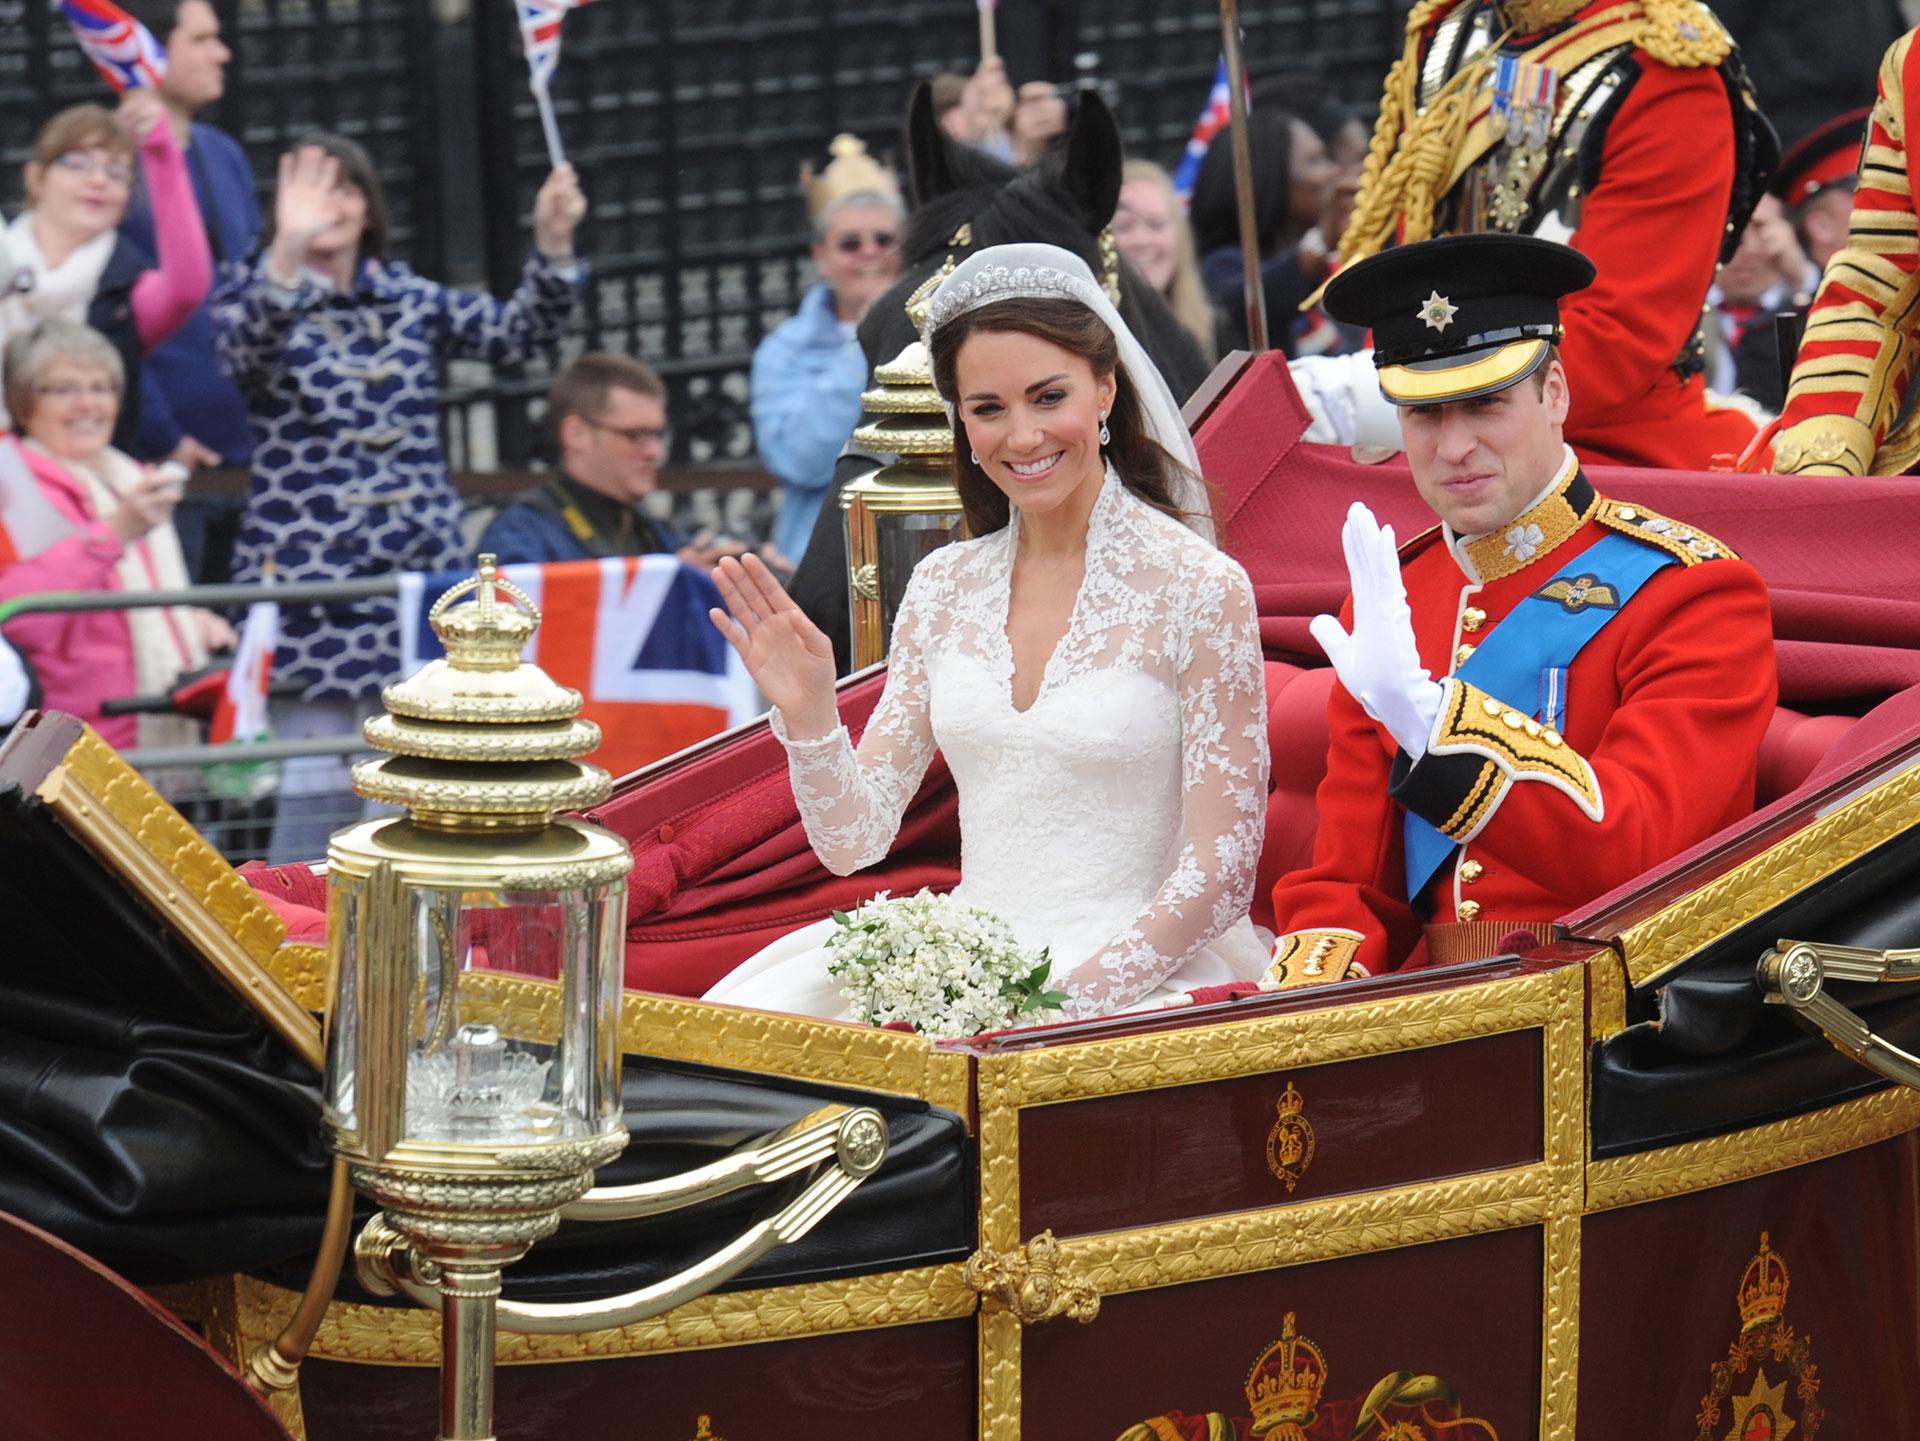 5 destinations to visit if you love the royals